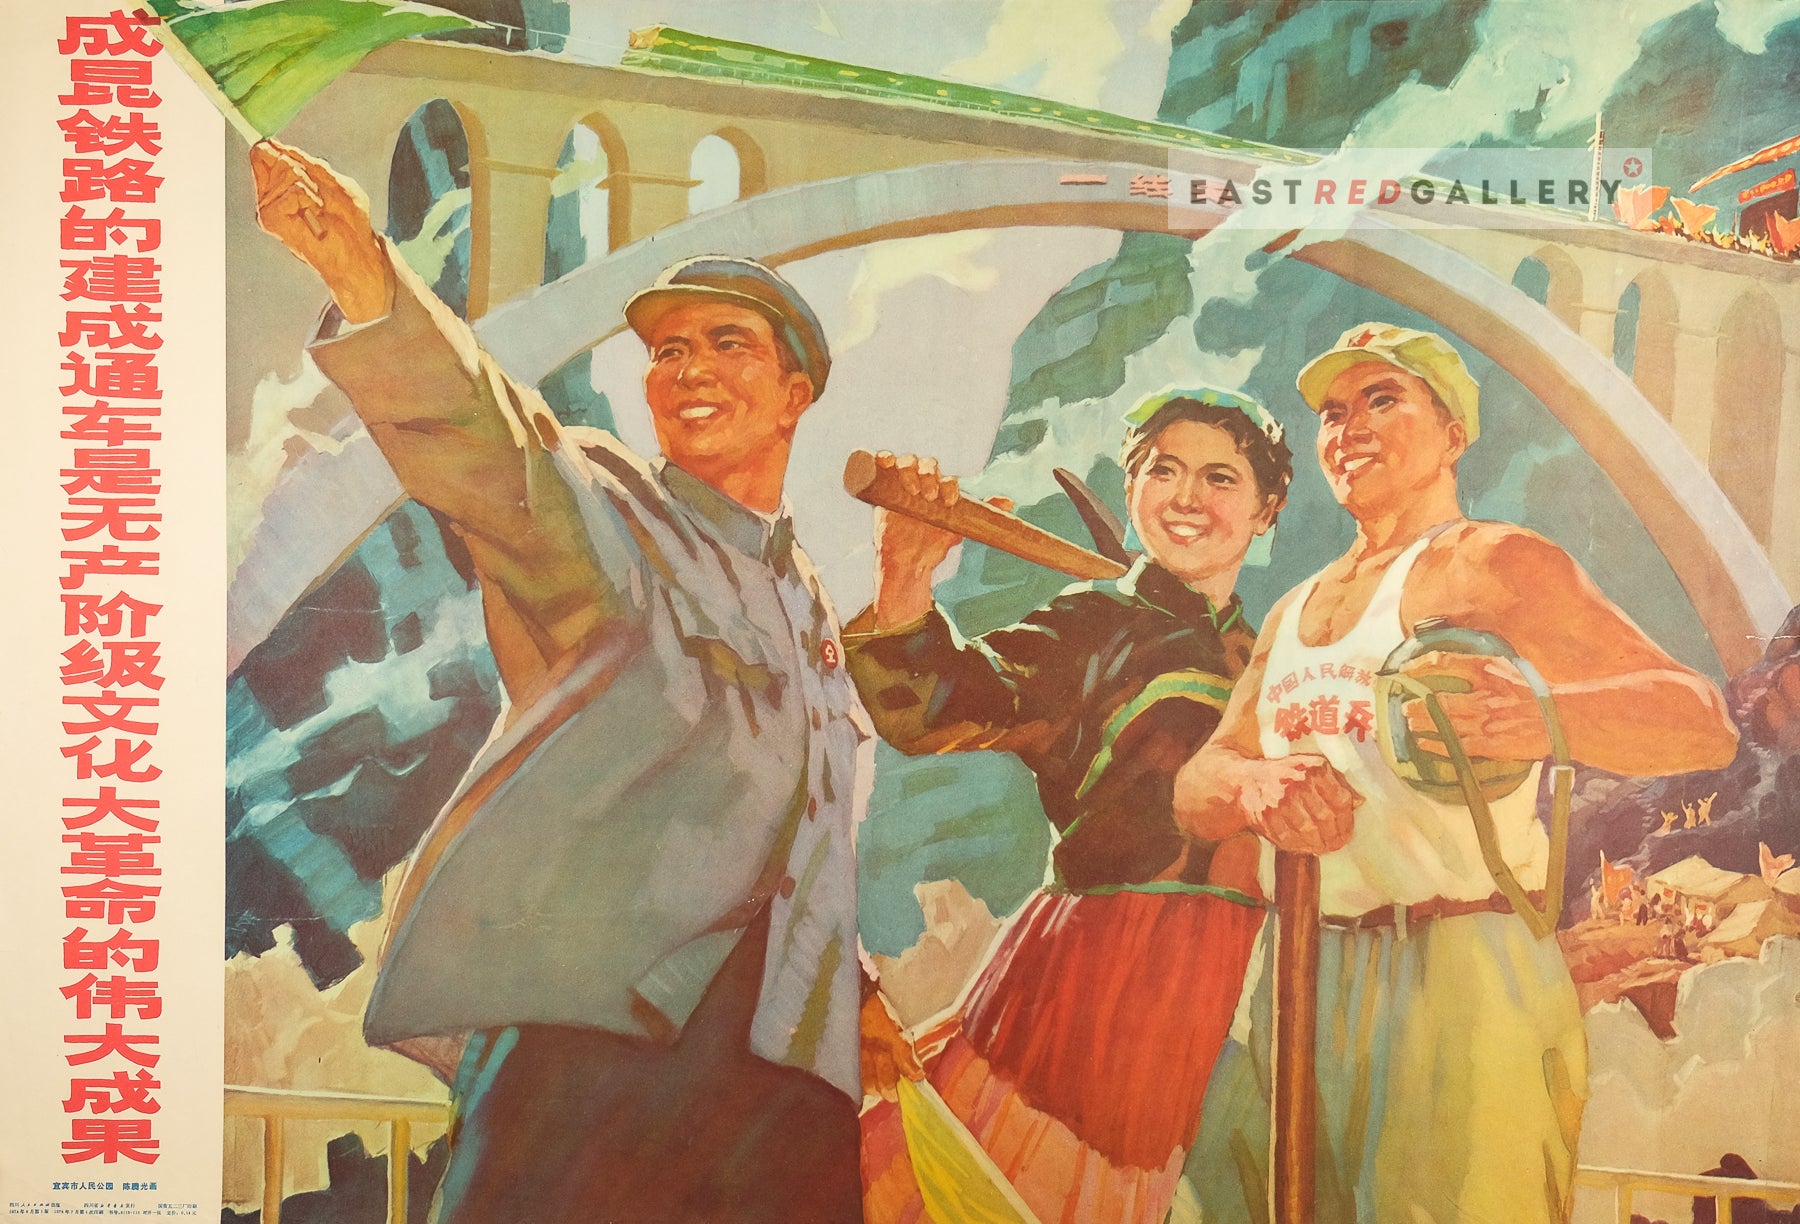 image of 1974 Chinese poster The completion and opening of the Chengdu-Kunming Railway is a great achievement of the Cultural Revolution